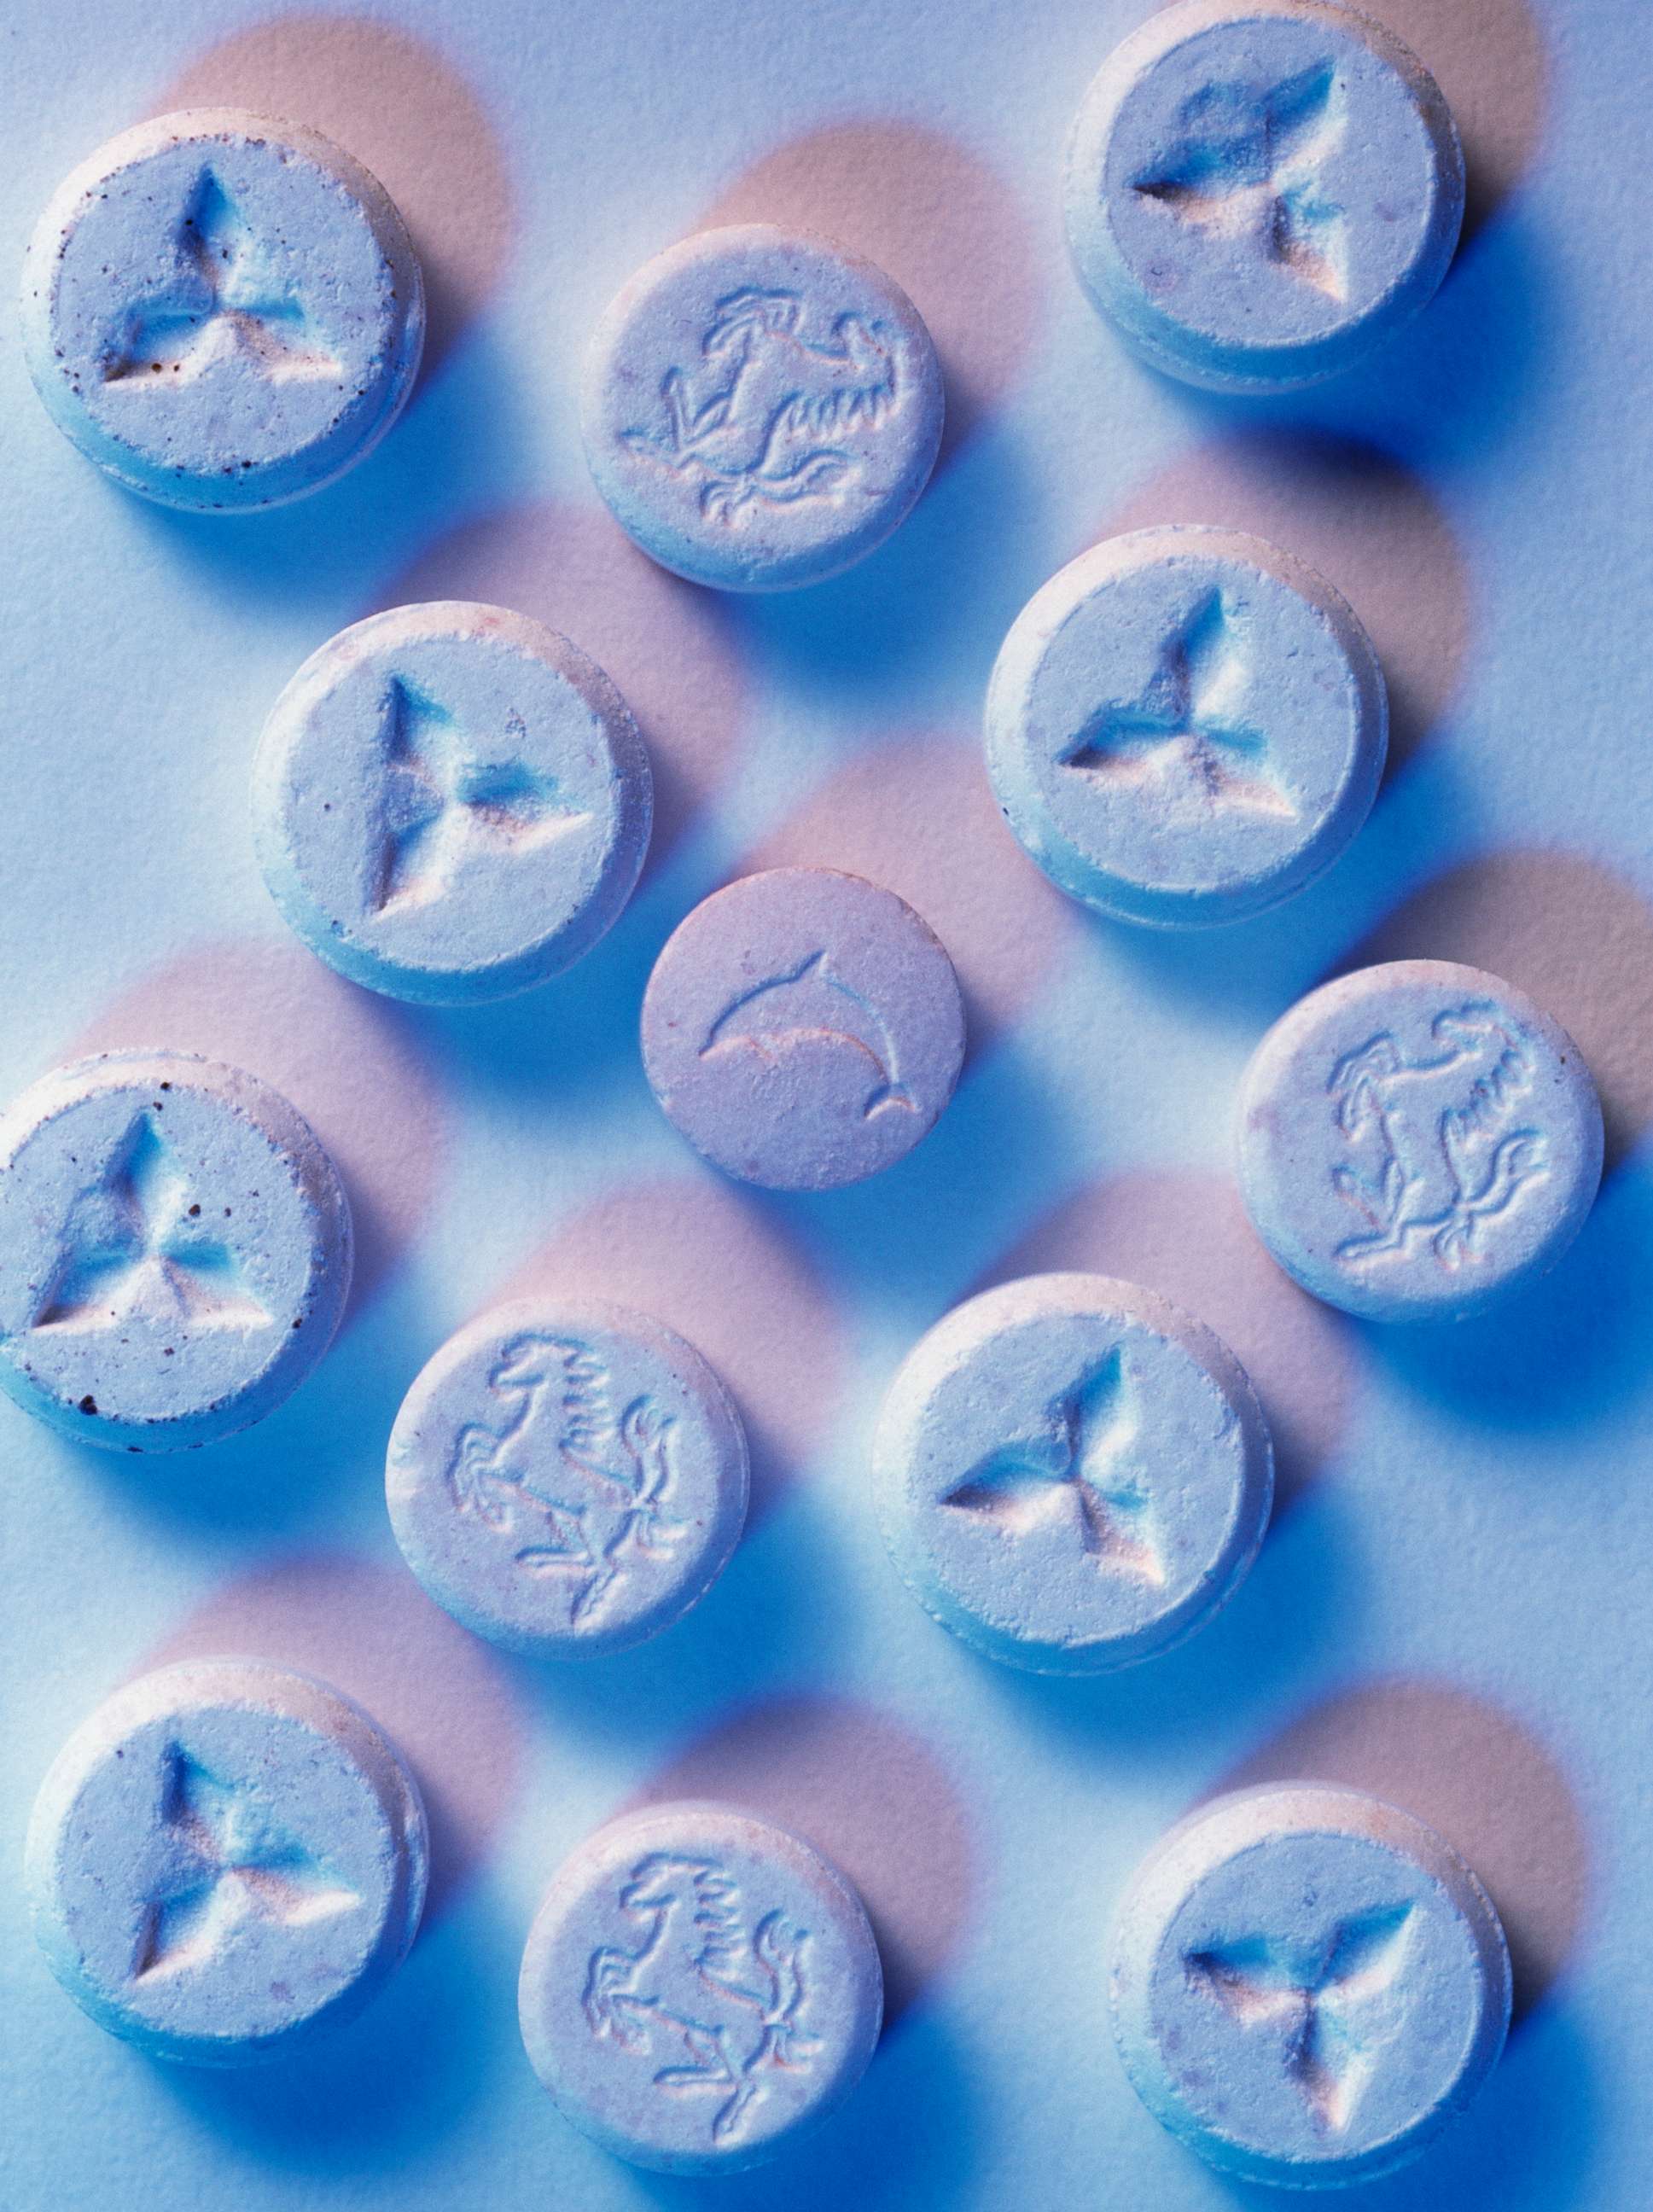 Ecstasy Or MDMA (also Known As Molly)